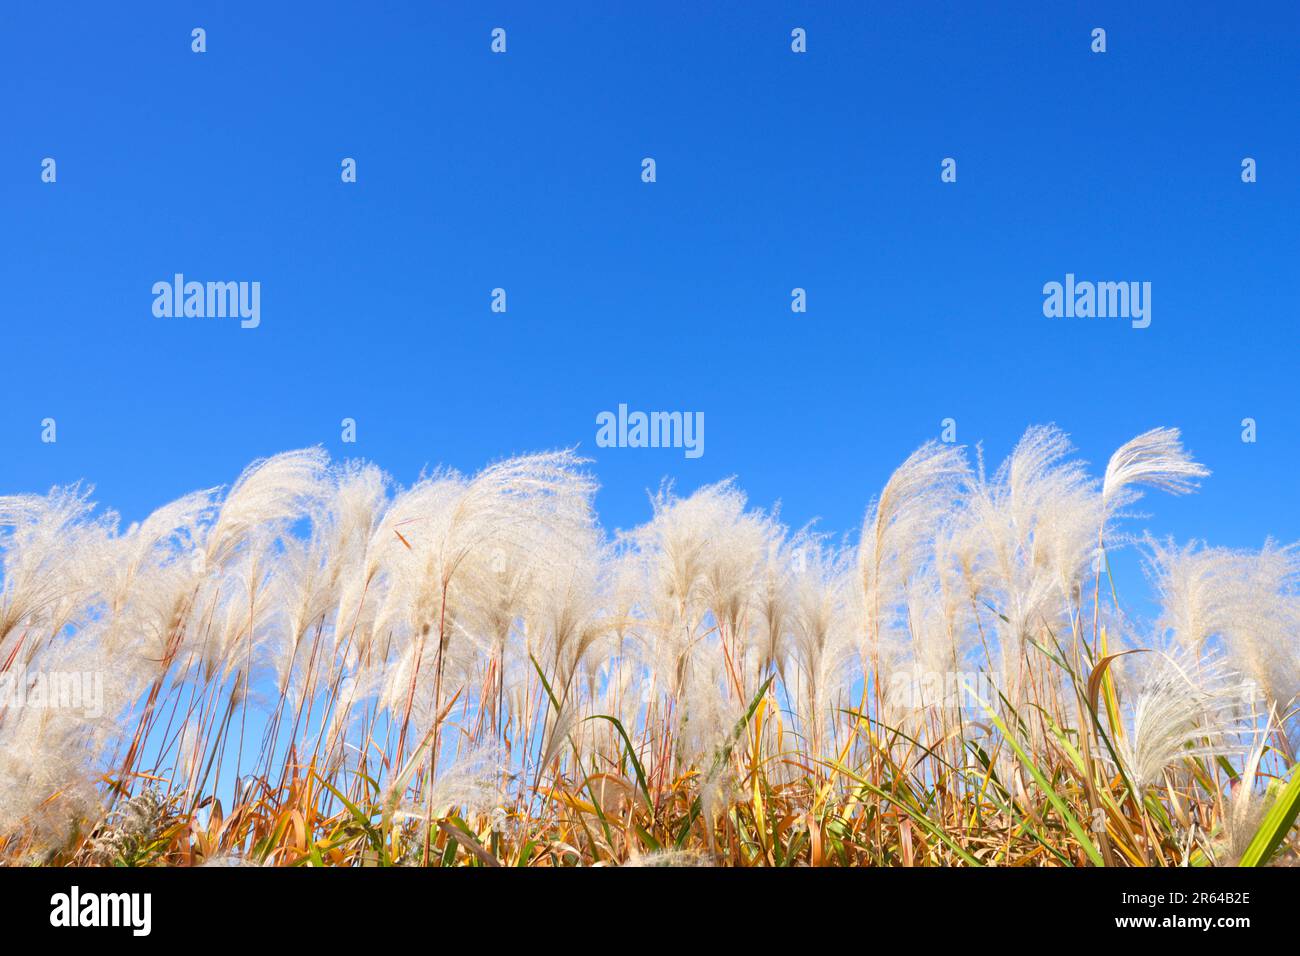 Blue sky and ears of silver grass Stock Photo